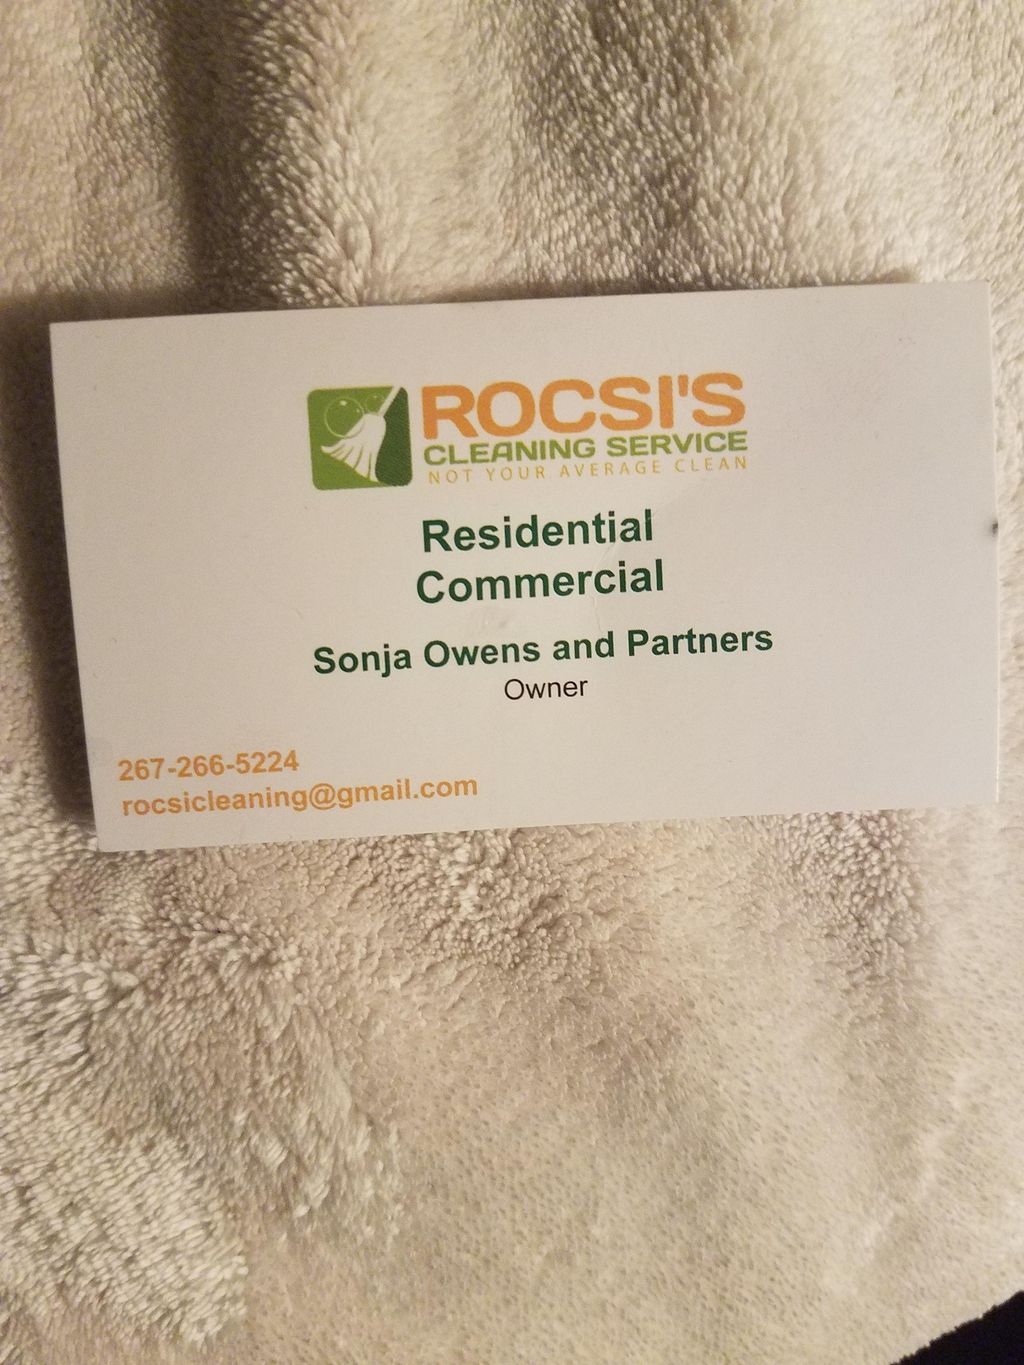 Rocsi's Cleaning Service